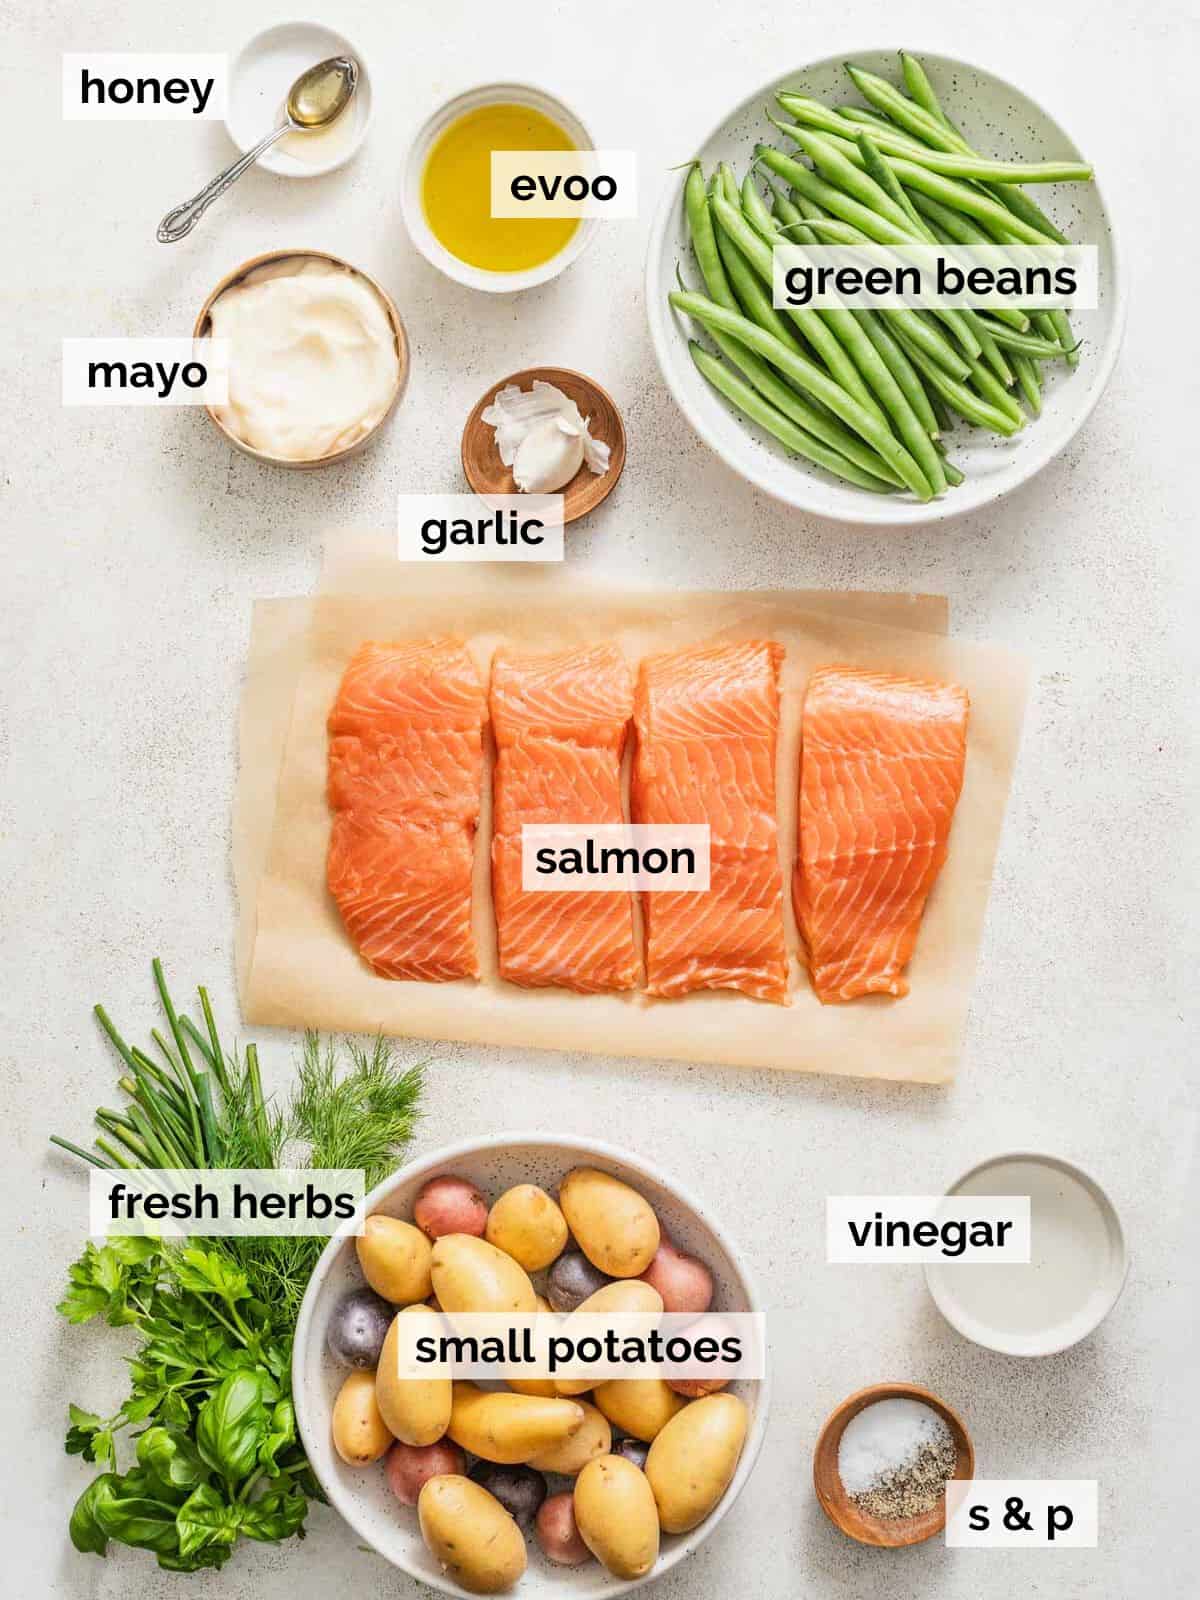 Salmon, green beans, and potatoes with the green goddess sauce ingredients on a white background.